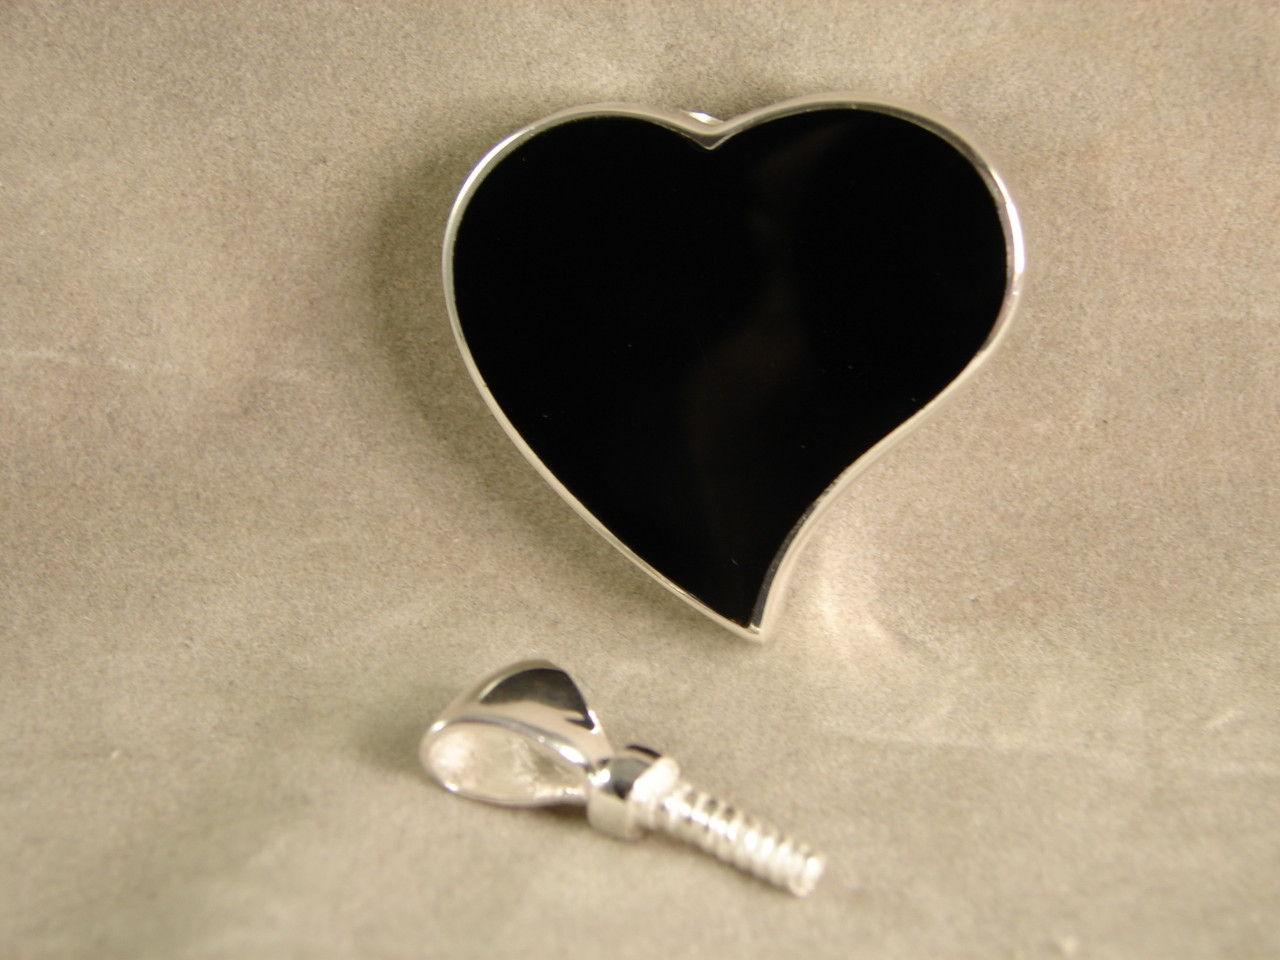 830BOCP: Black Onyx Heart Cremation Pendant Mounted in Sterling Silver, Engravable Area, 1-3/16 inch x 3/4 inch.